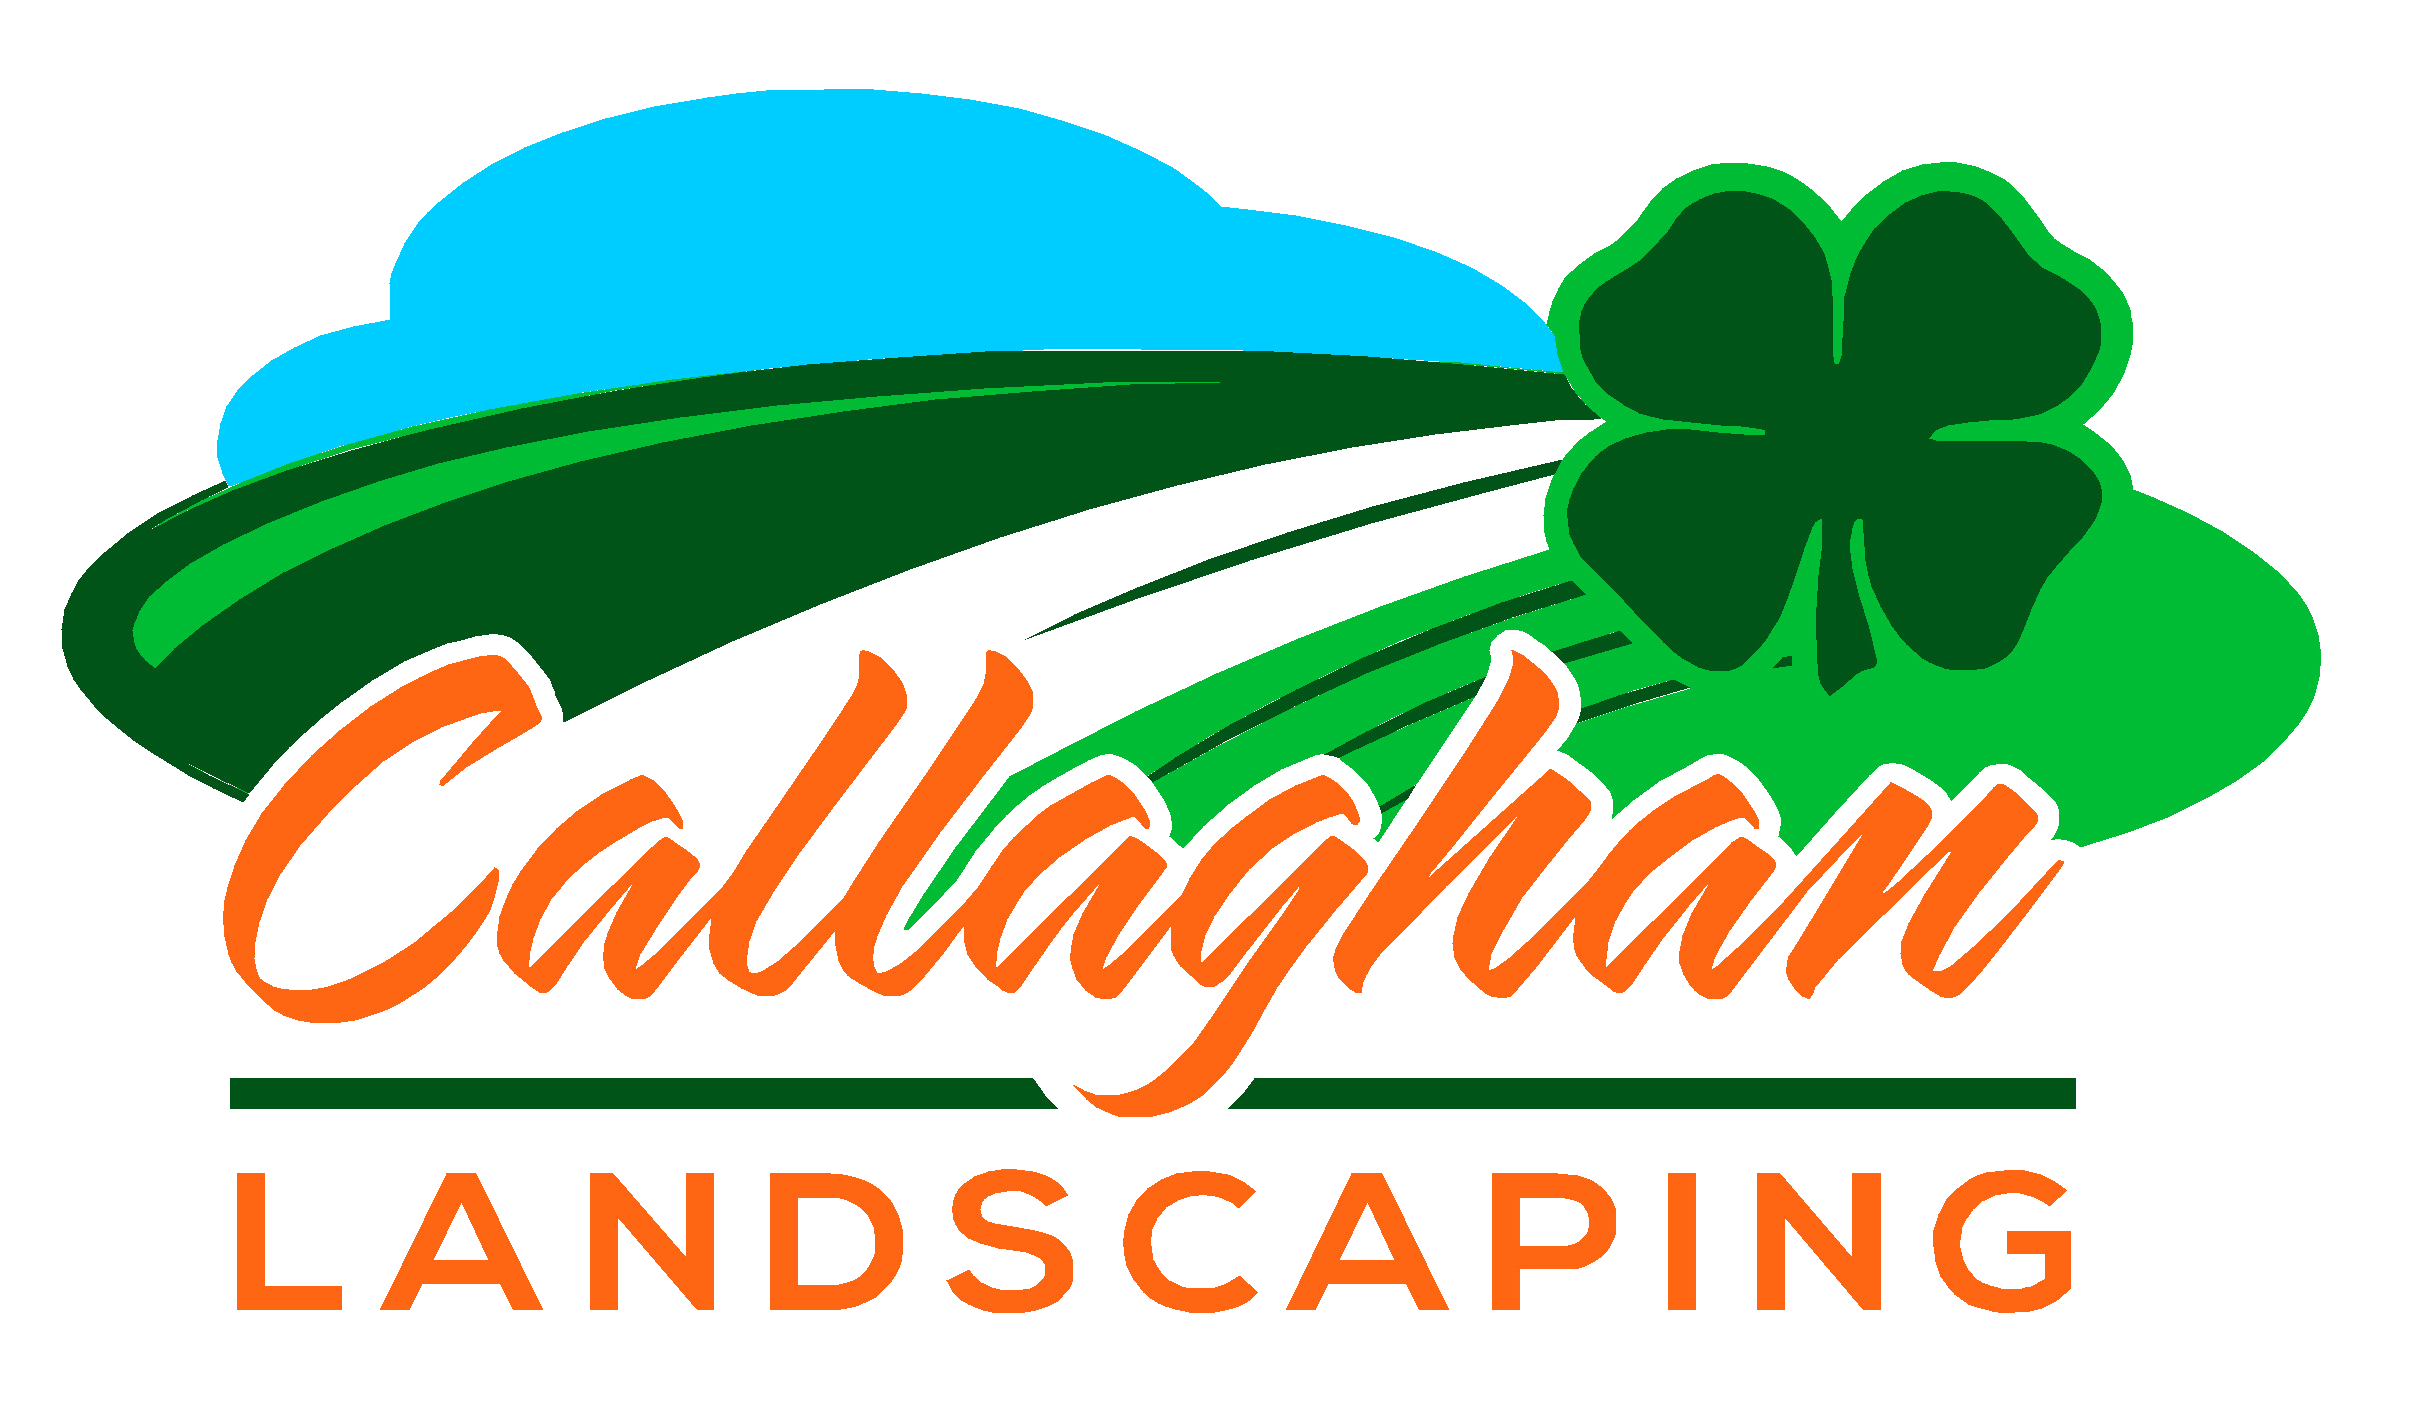 Welcome to Callaghan Landscaping